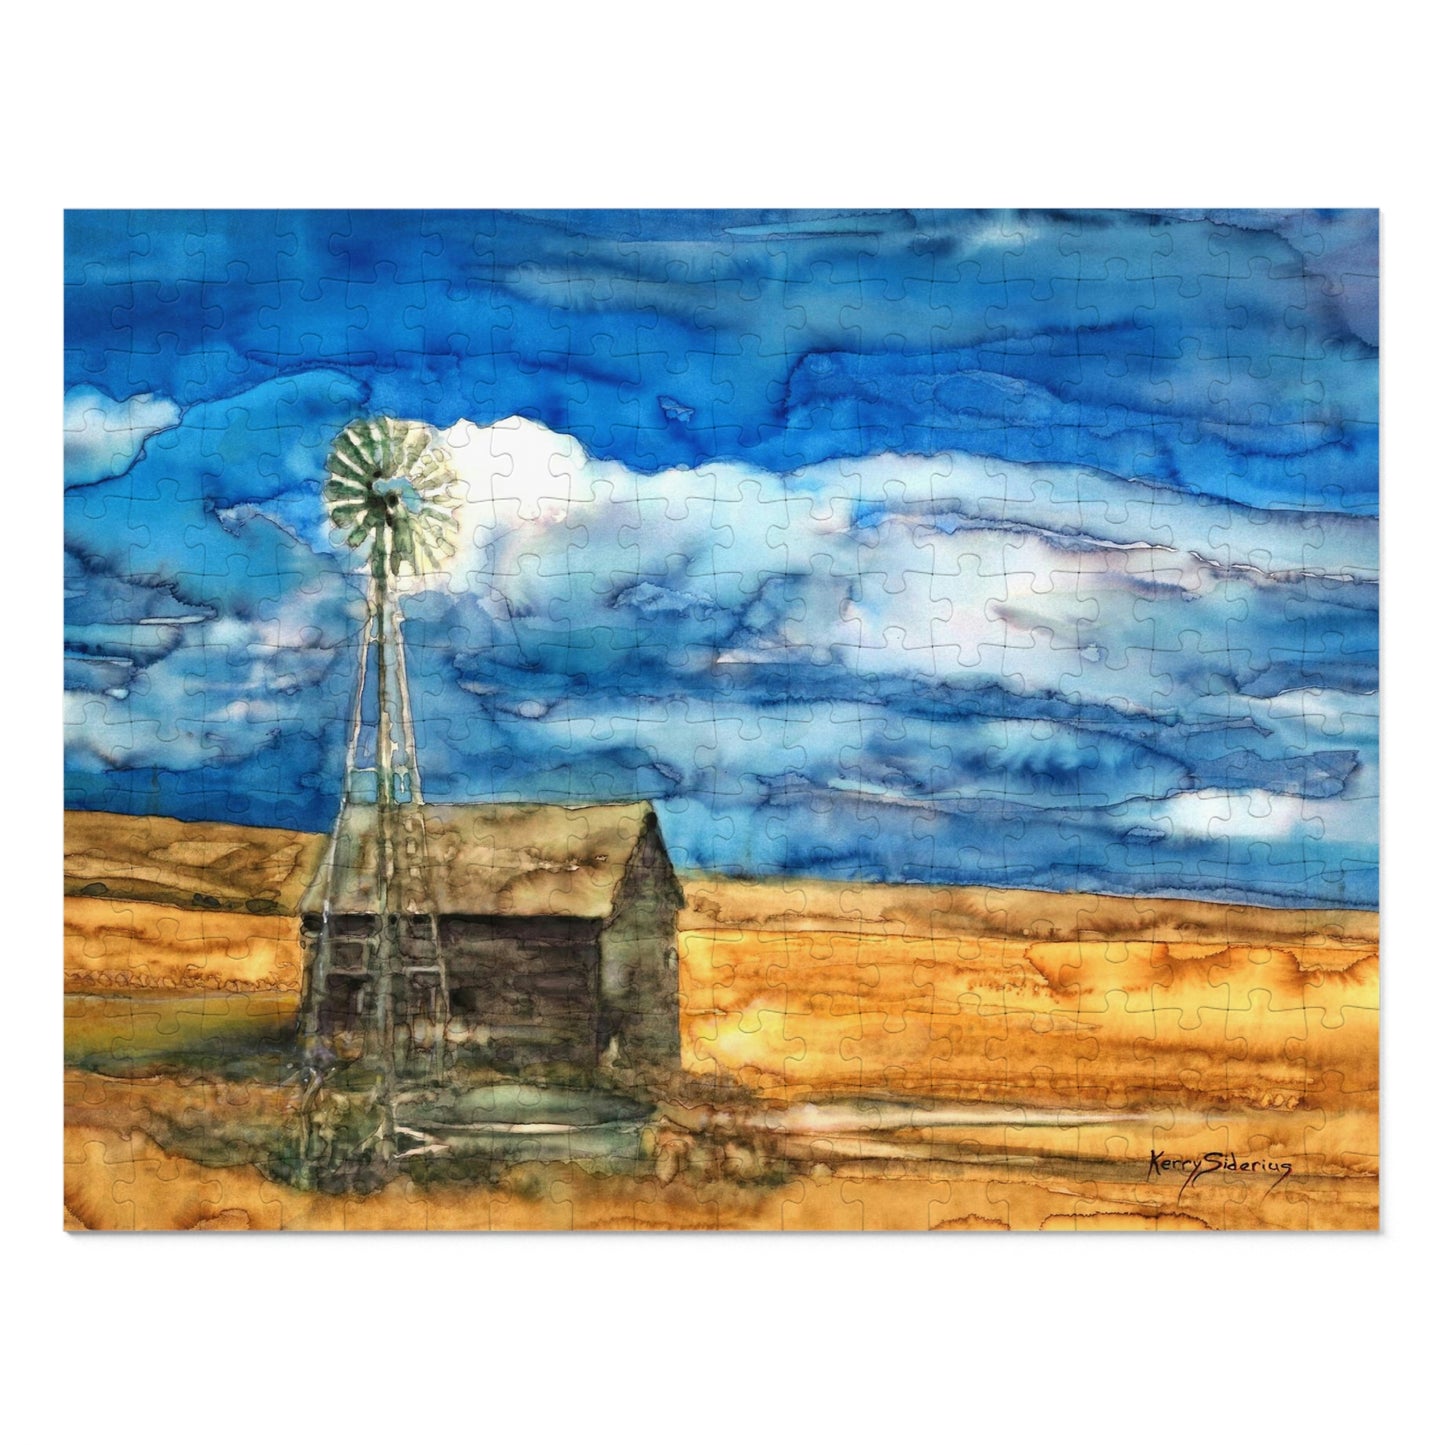 "Waterville Windmill" Metal Tin 252 Piece Puzzle - Kerry Siderius Art 